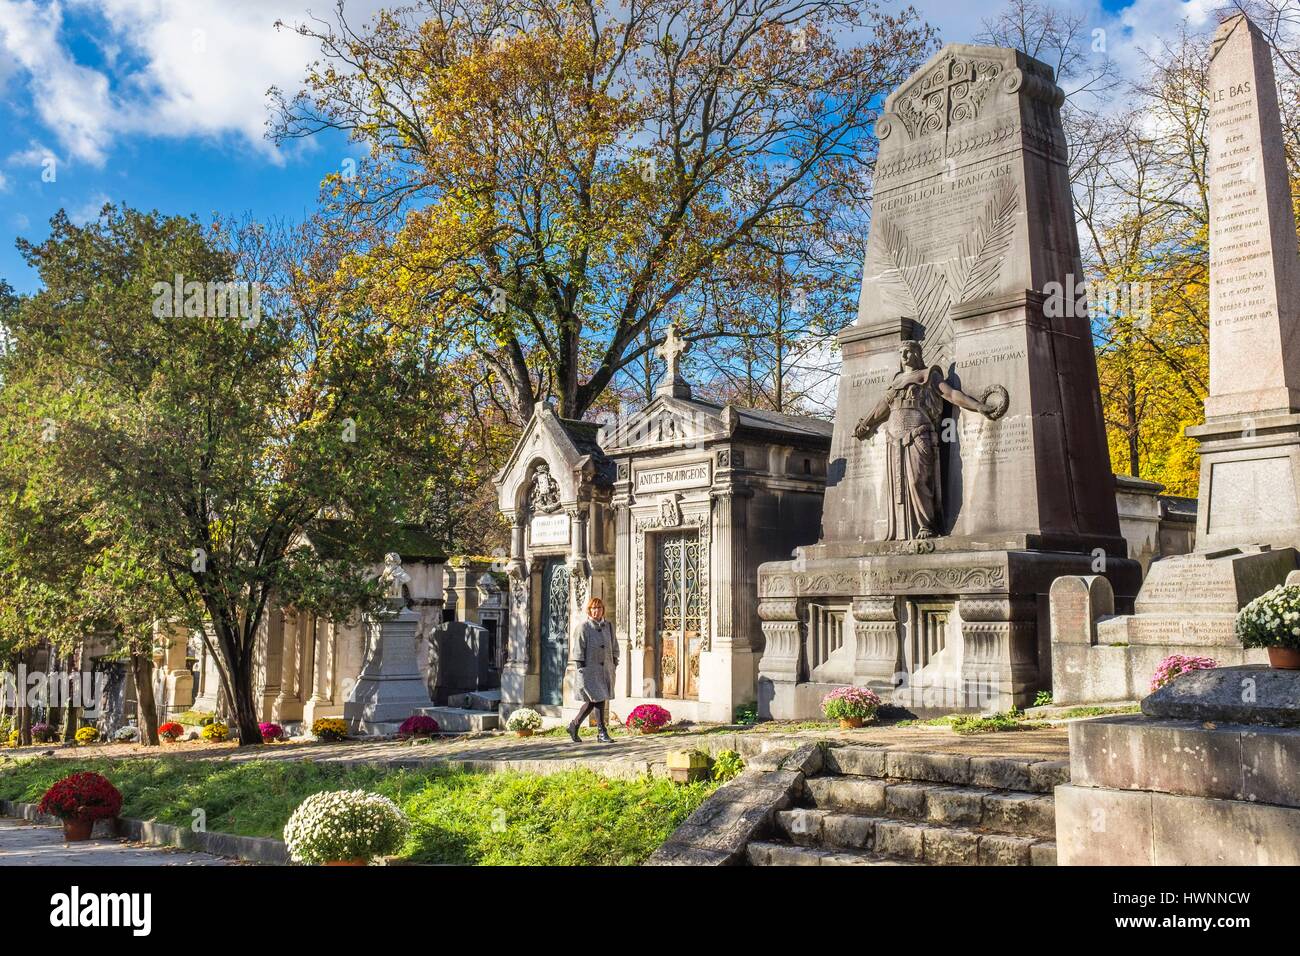 France, Paris, Pere Lachaise cemetery, the largest cemetery in the city of Paris and one of the most famous in the world, monument to the generals Claude Martin Lecomte (1817-1871) and Jacques Leon Clement-Thomas (1809-1871) shot on March 18, 1871 in Paris during the events of the Commune Stock Photo